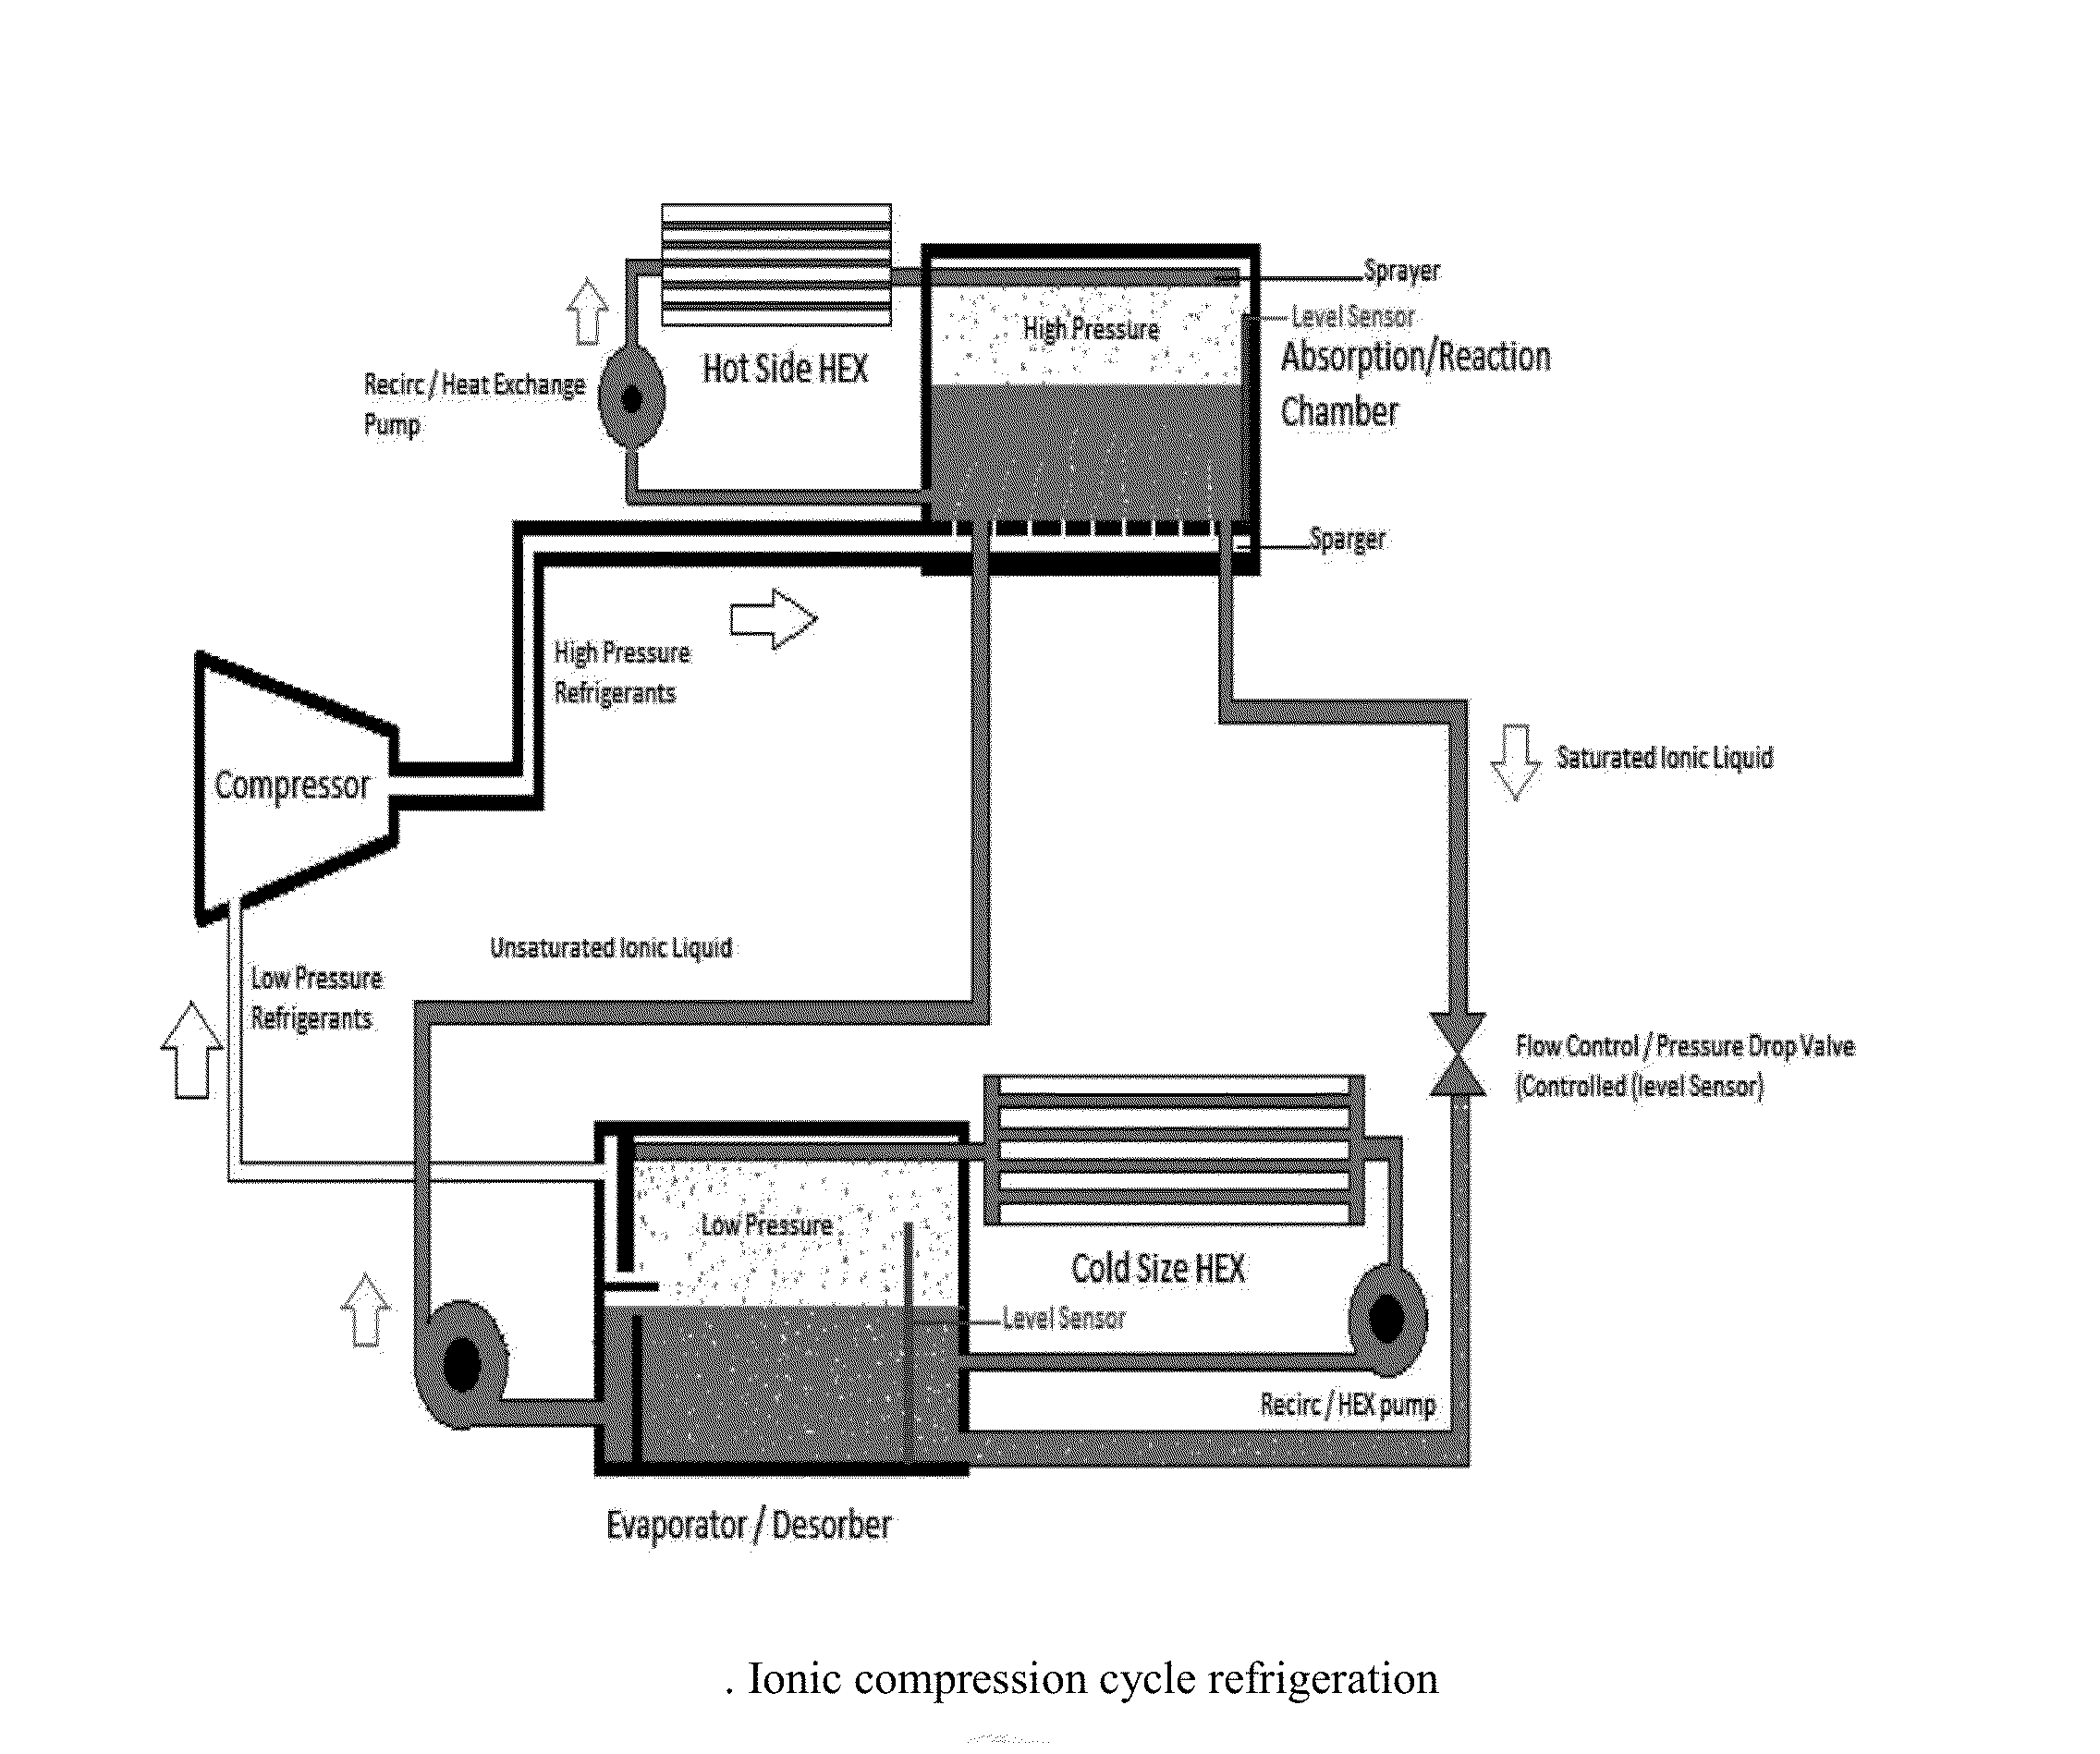 Refrigeration system with dual refrigerants and liquid working fluids